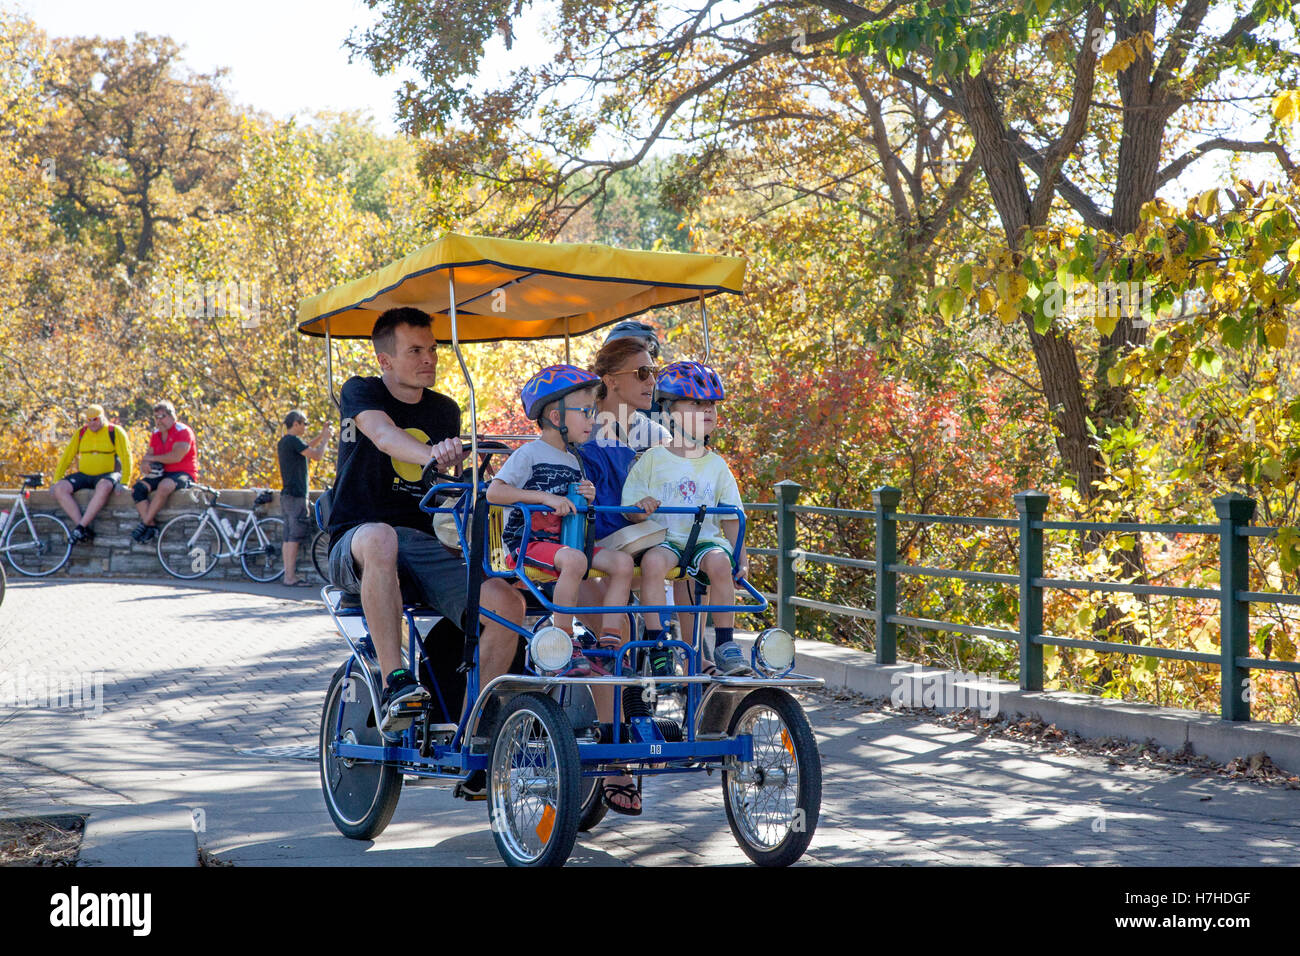 Dad and mom peddling their two children in a canopy covered Double Surrey bike at Minnehaha Park. Minneapolis Minnesota MN USA Stock Photo